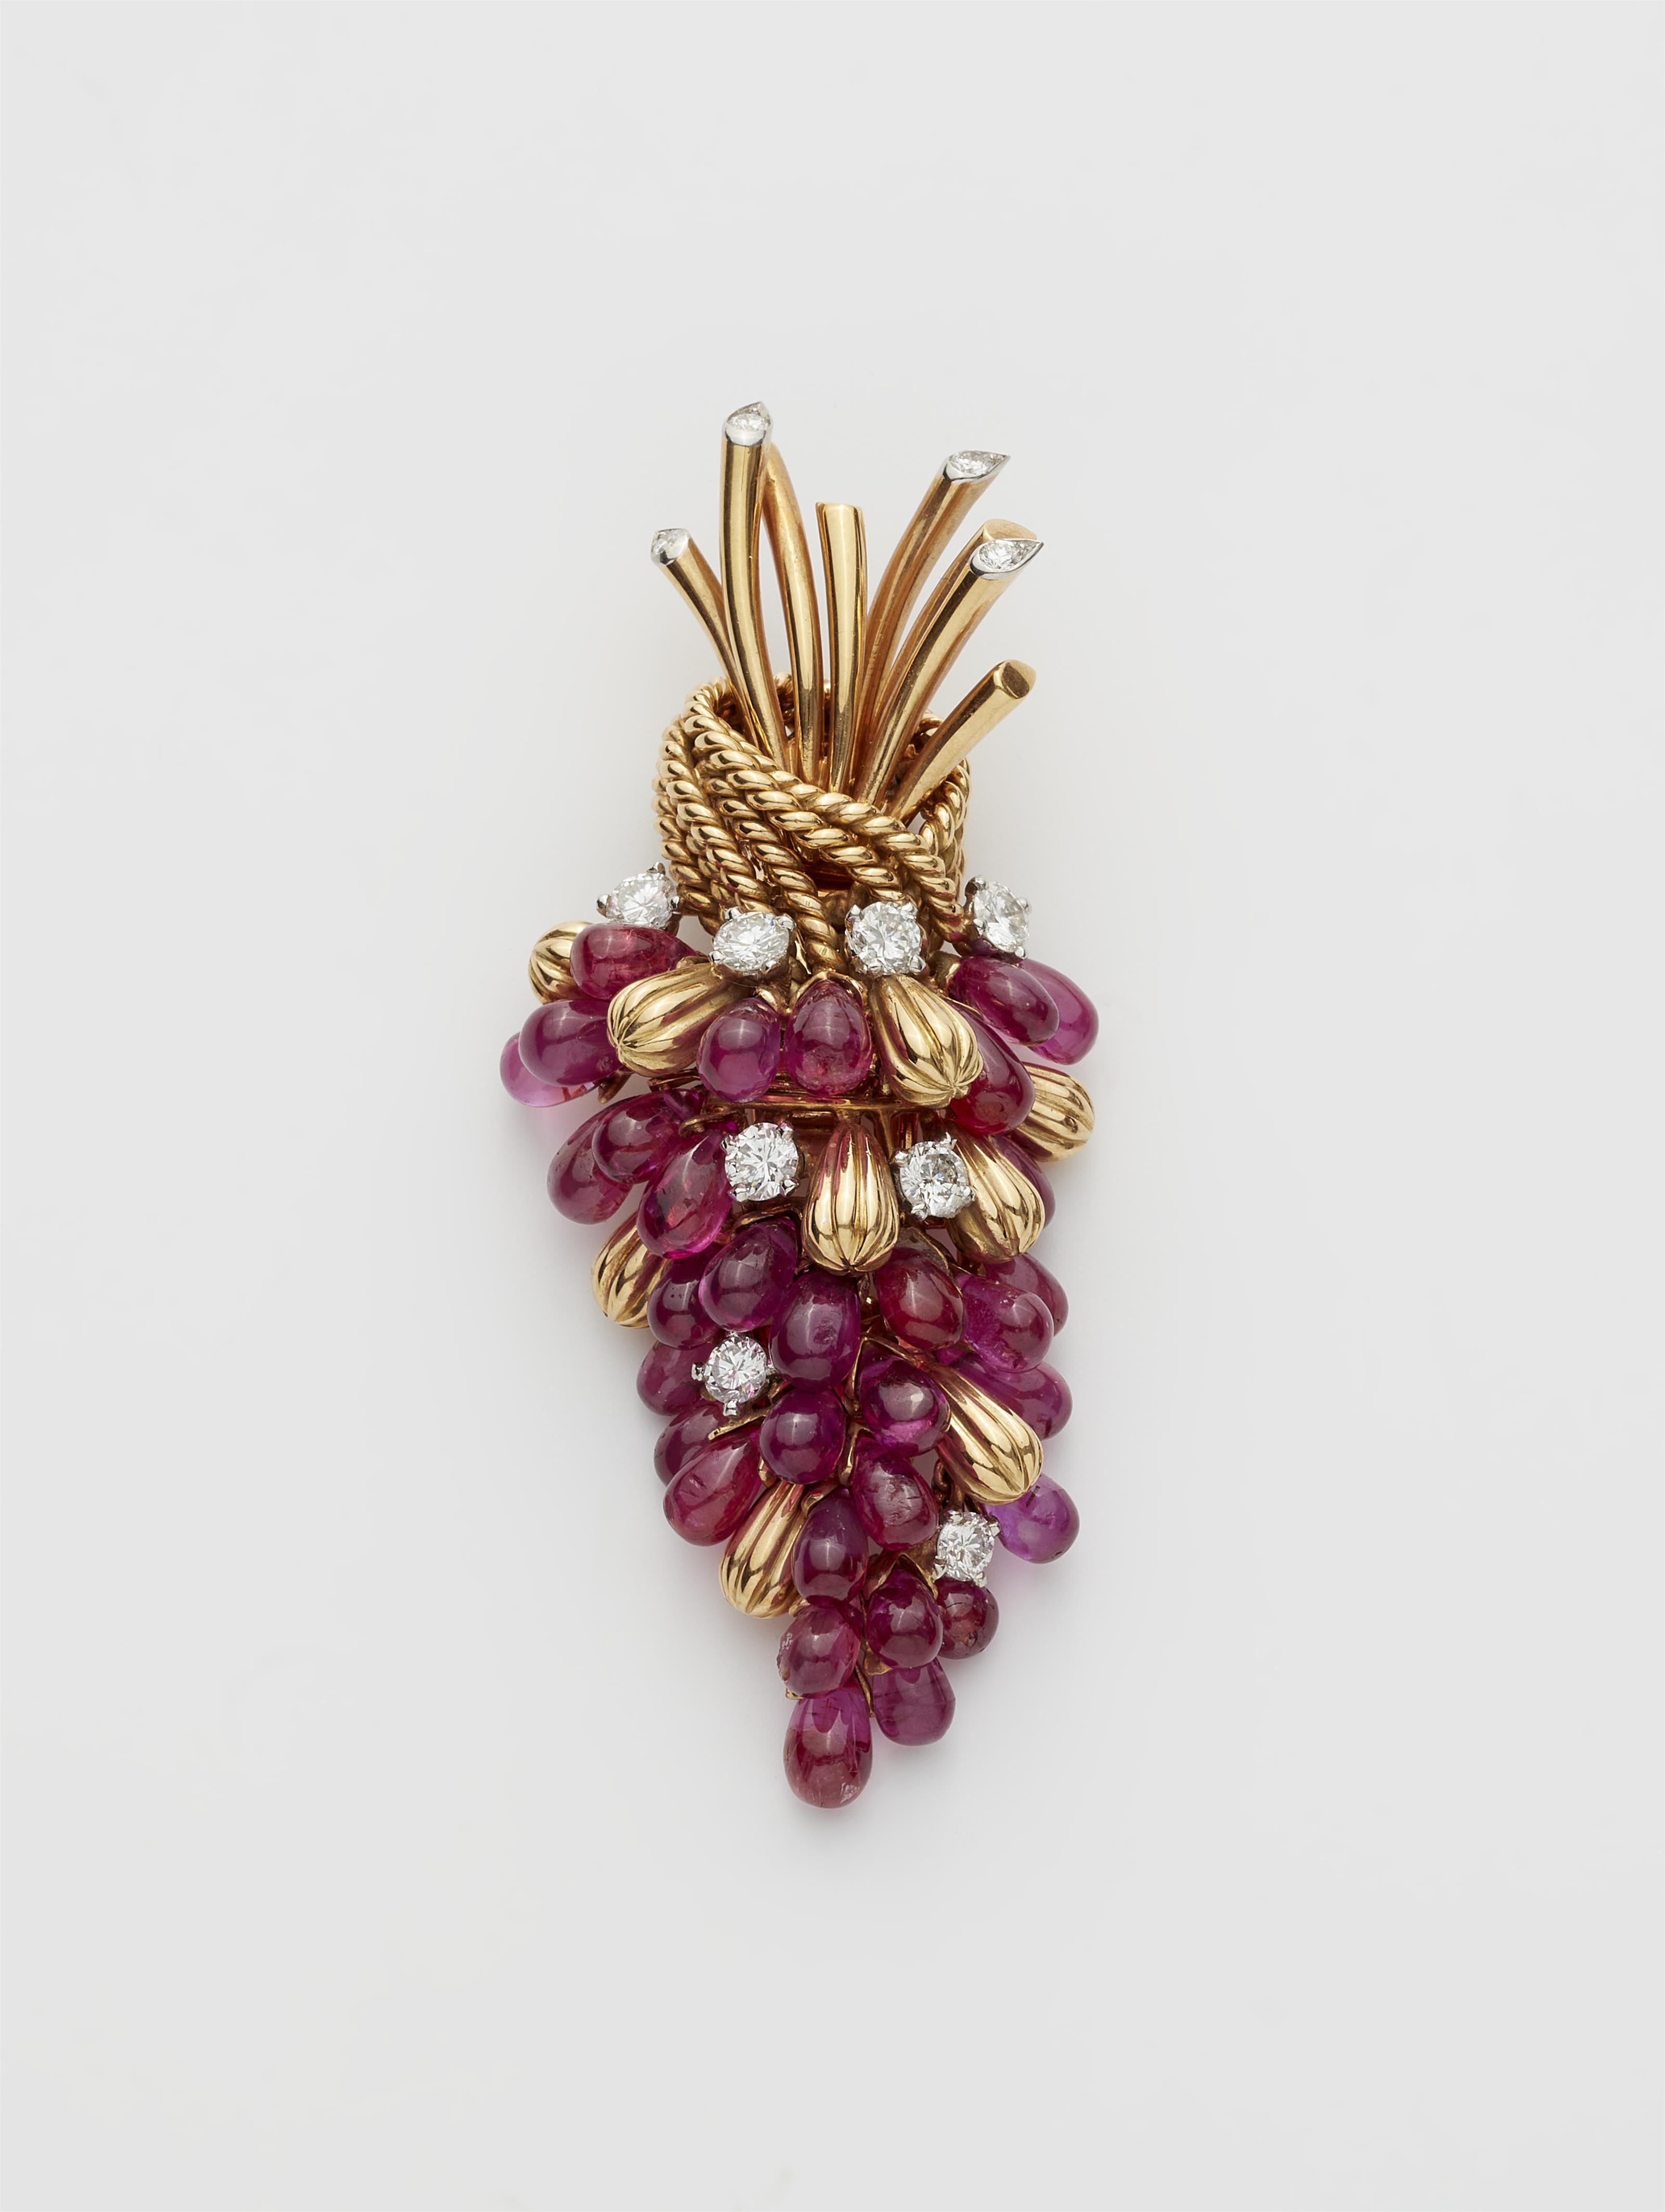 An 18k gold ruby droplet and diamond clip brooch designed as a movable bunch of grapes, can also be worn as a pendant and brooch with detachable mountings. - image-2